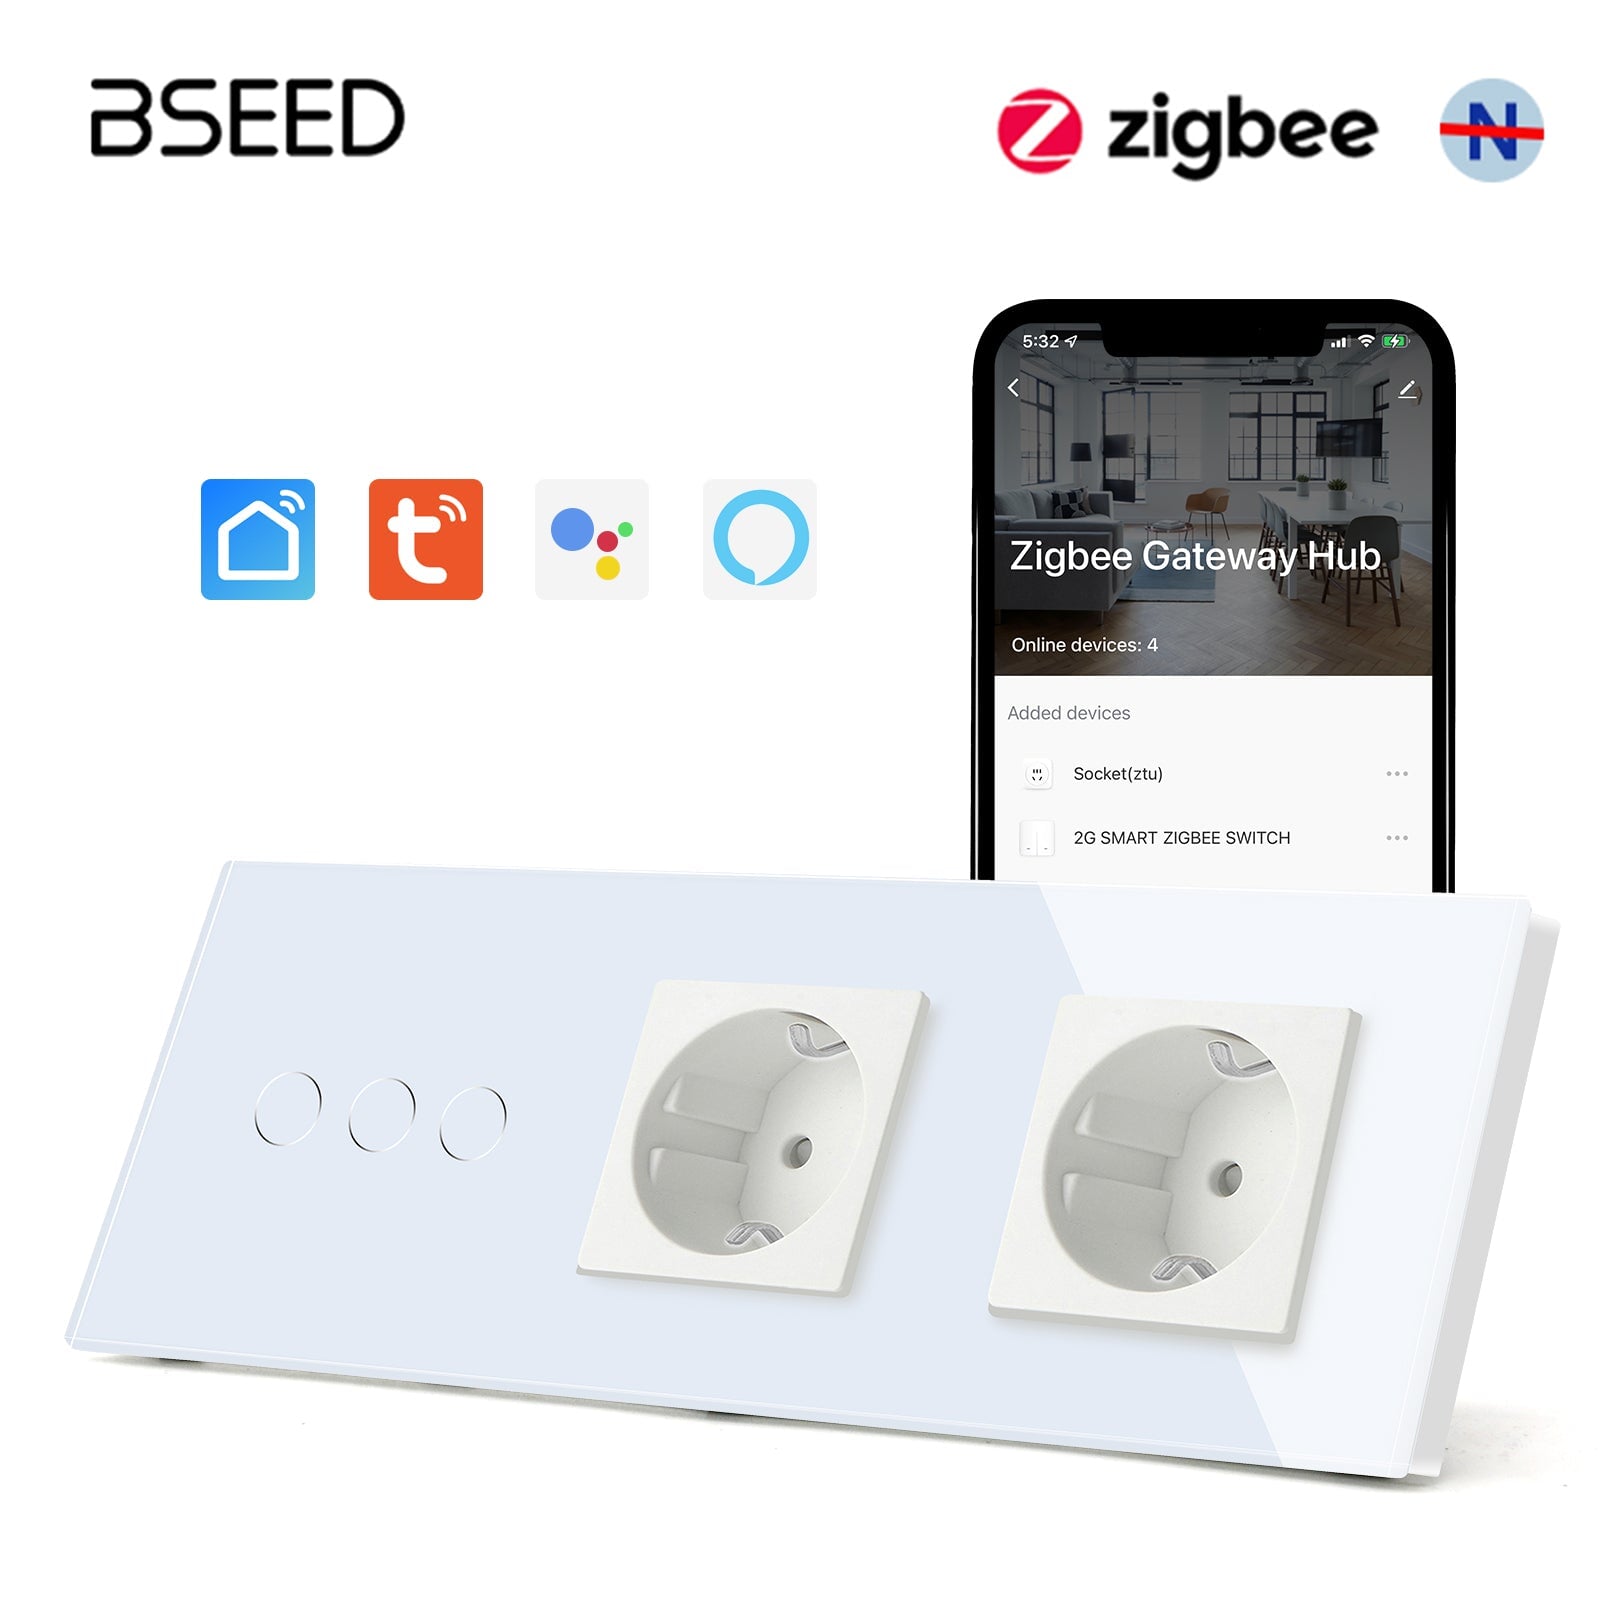 Bseed Zigbee Touch 1/2/3 Gang Light Switches Single Live Line Multi Control With Double EU Standard Not Smart Wall Sockets Light Switches Bseedswitch White 3Gang 